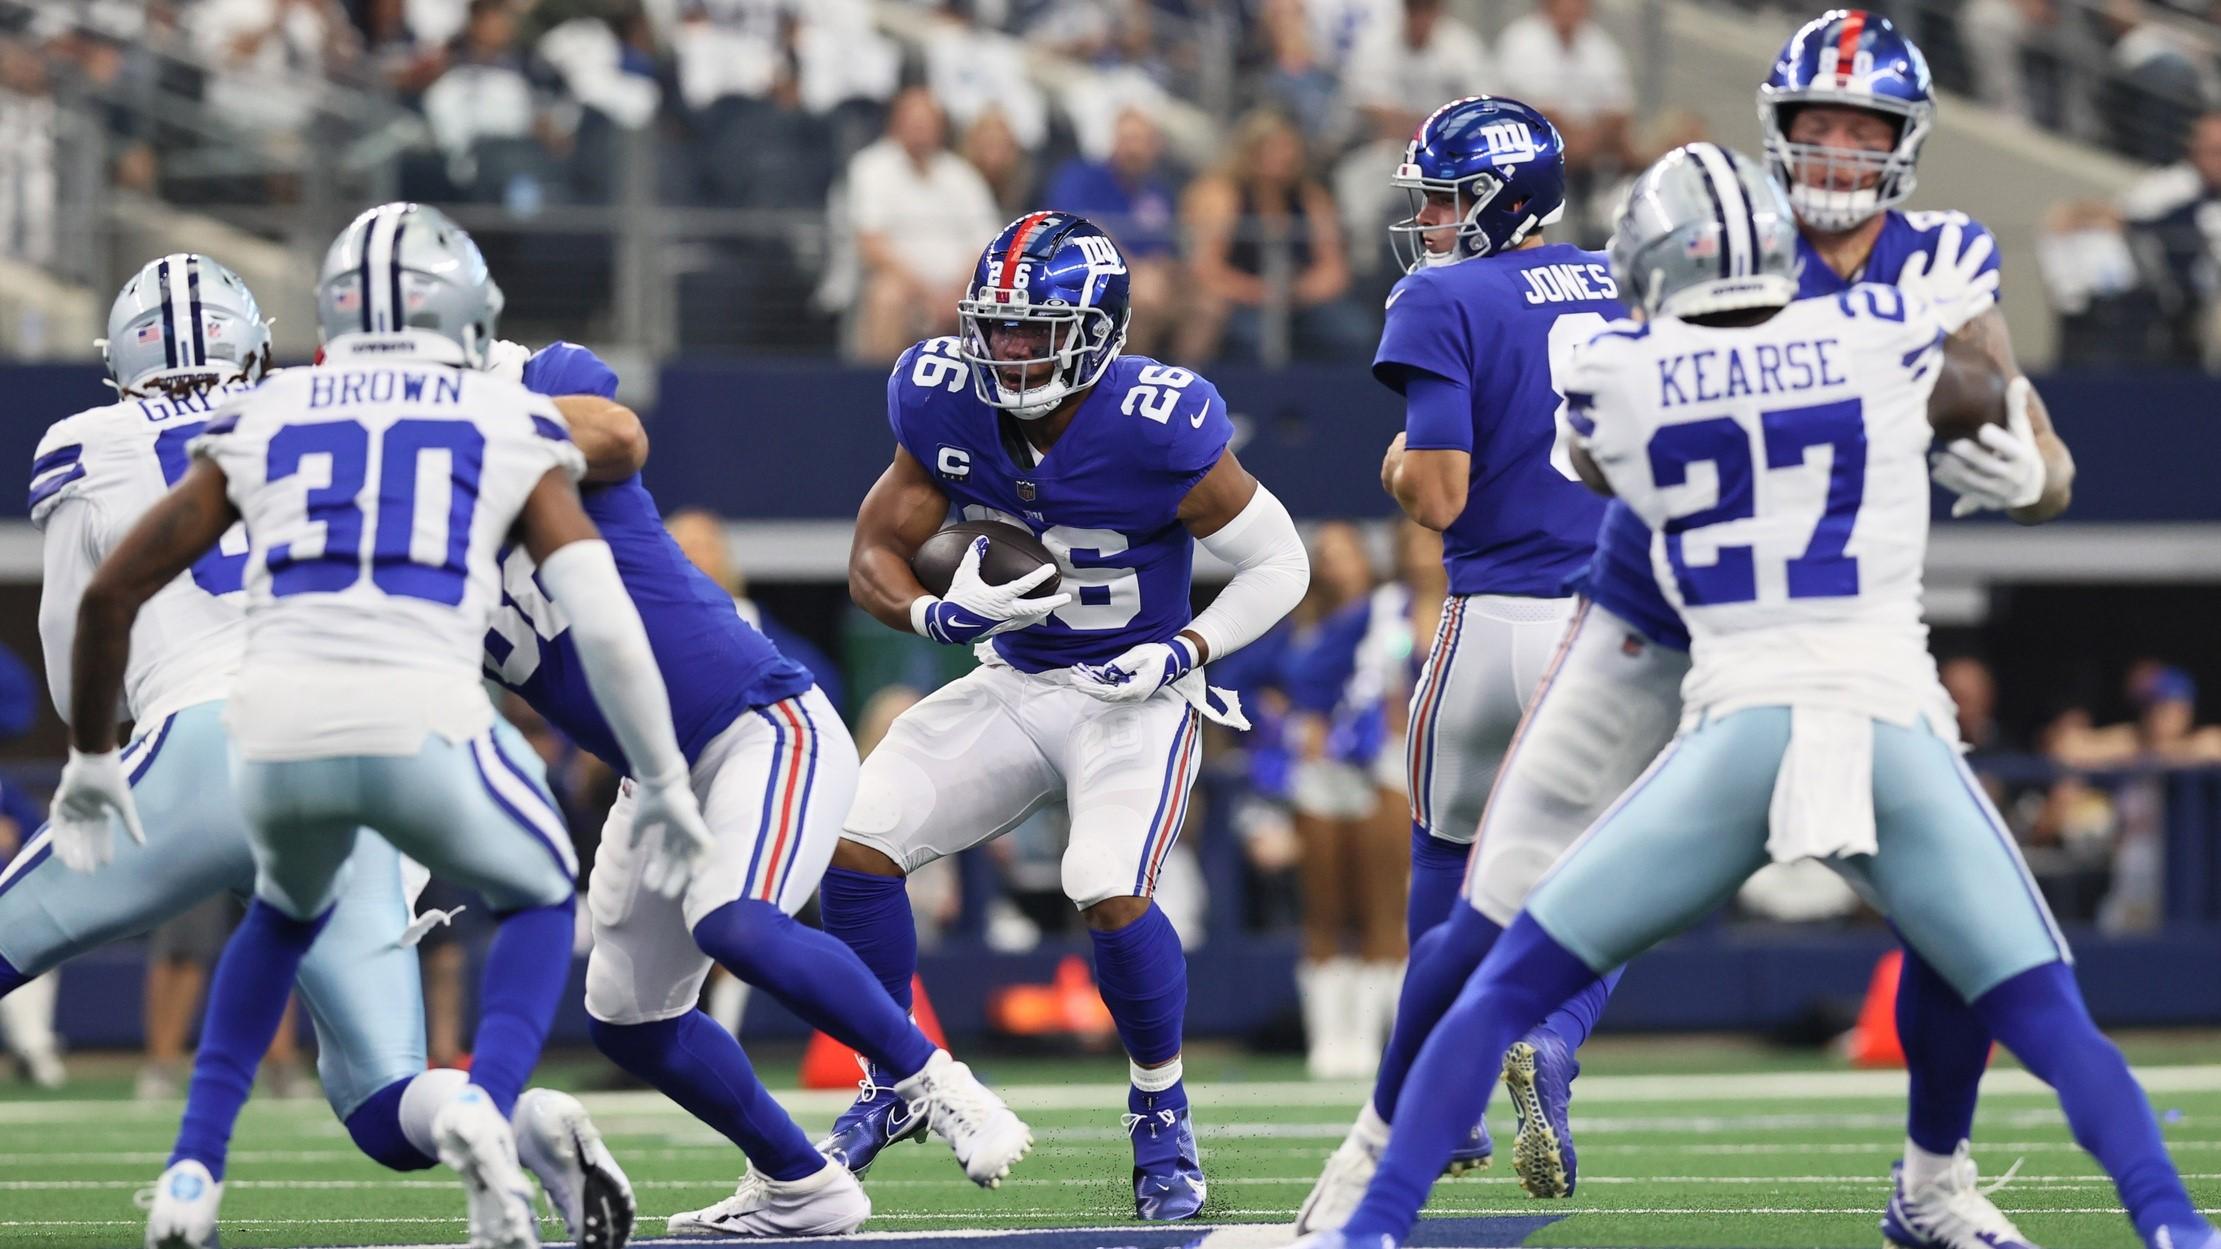 Oct 10, 2021; Arlington, Texas, USA; New York Giants running back Saquon Barkley (26) carries the ball in the first quarter as Dallas Cowboys cornerback Anthony Brown (30) defends at AT&T Stadium. / Matthew Emmons-USA TODAY Sports